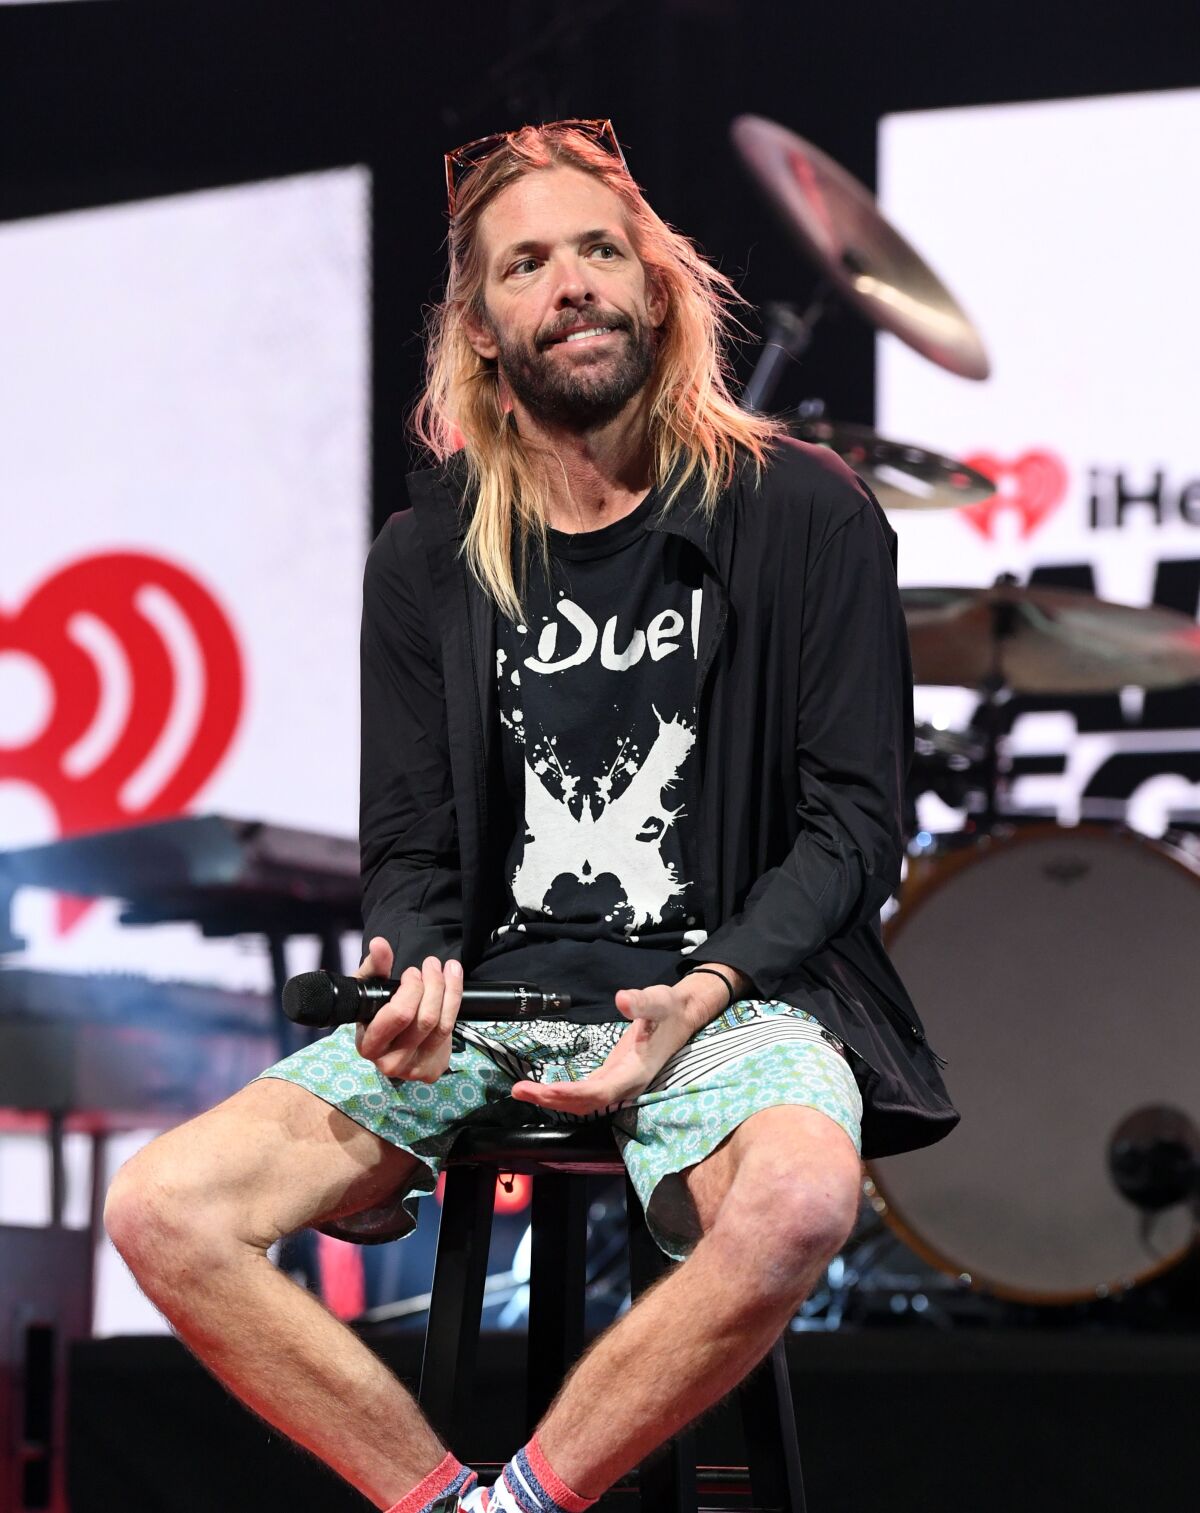 Taylor Hawkins of Foo Fighters sits onstage during an interview